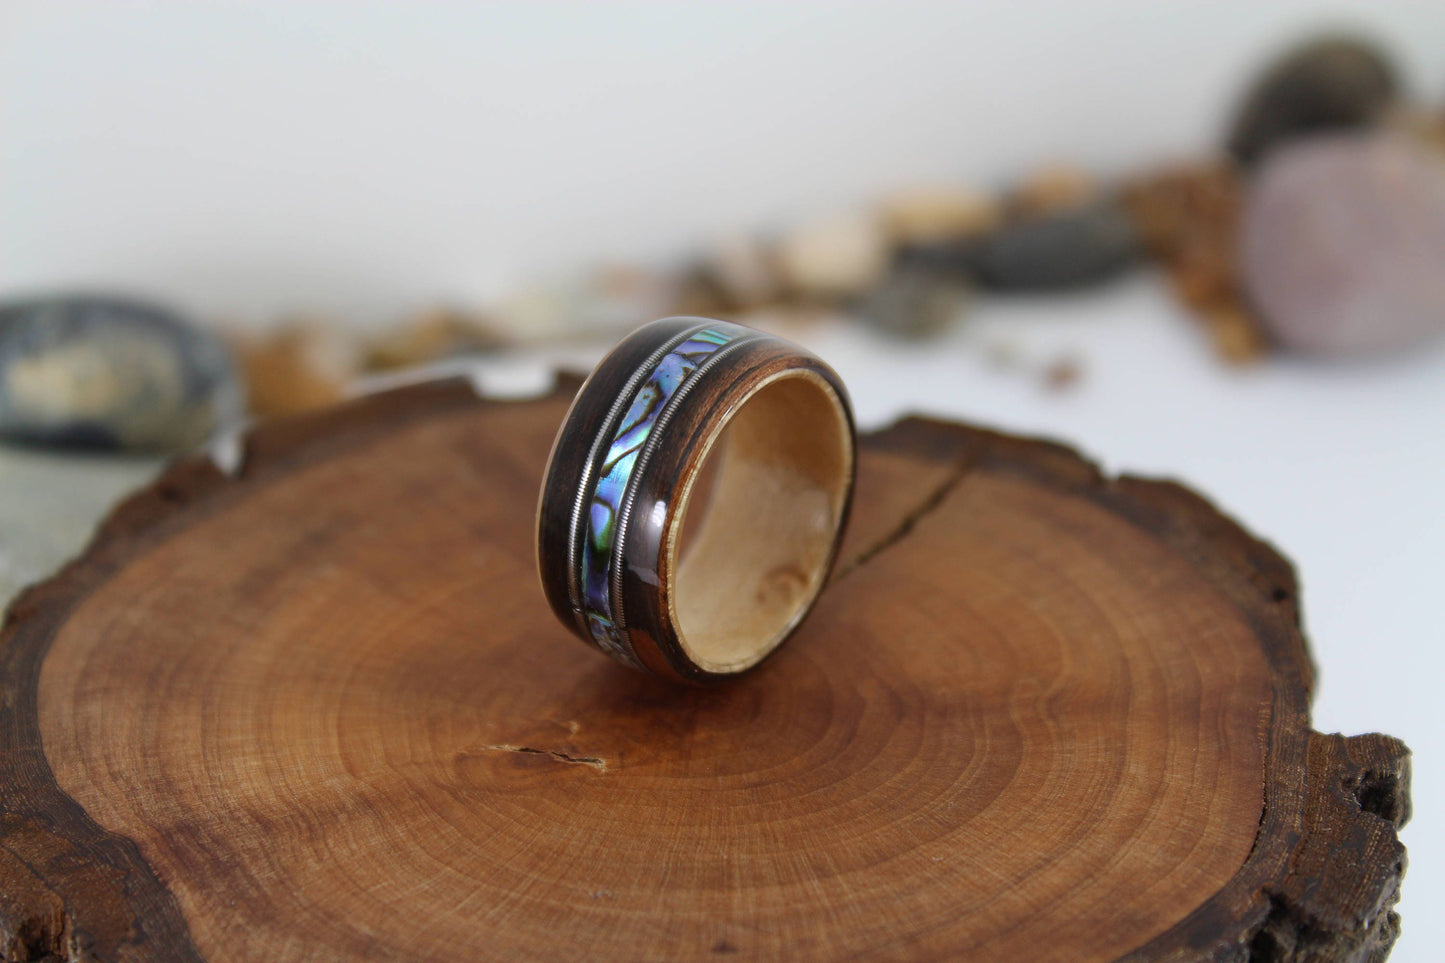 Ebony & Maple With Abalone + Guitar Strings Bent Wood Ring